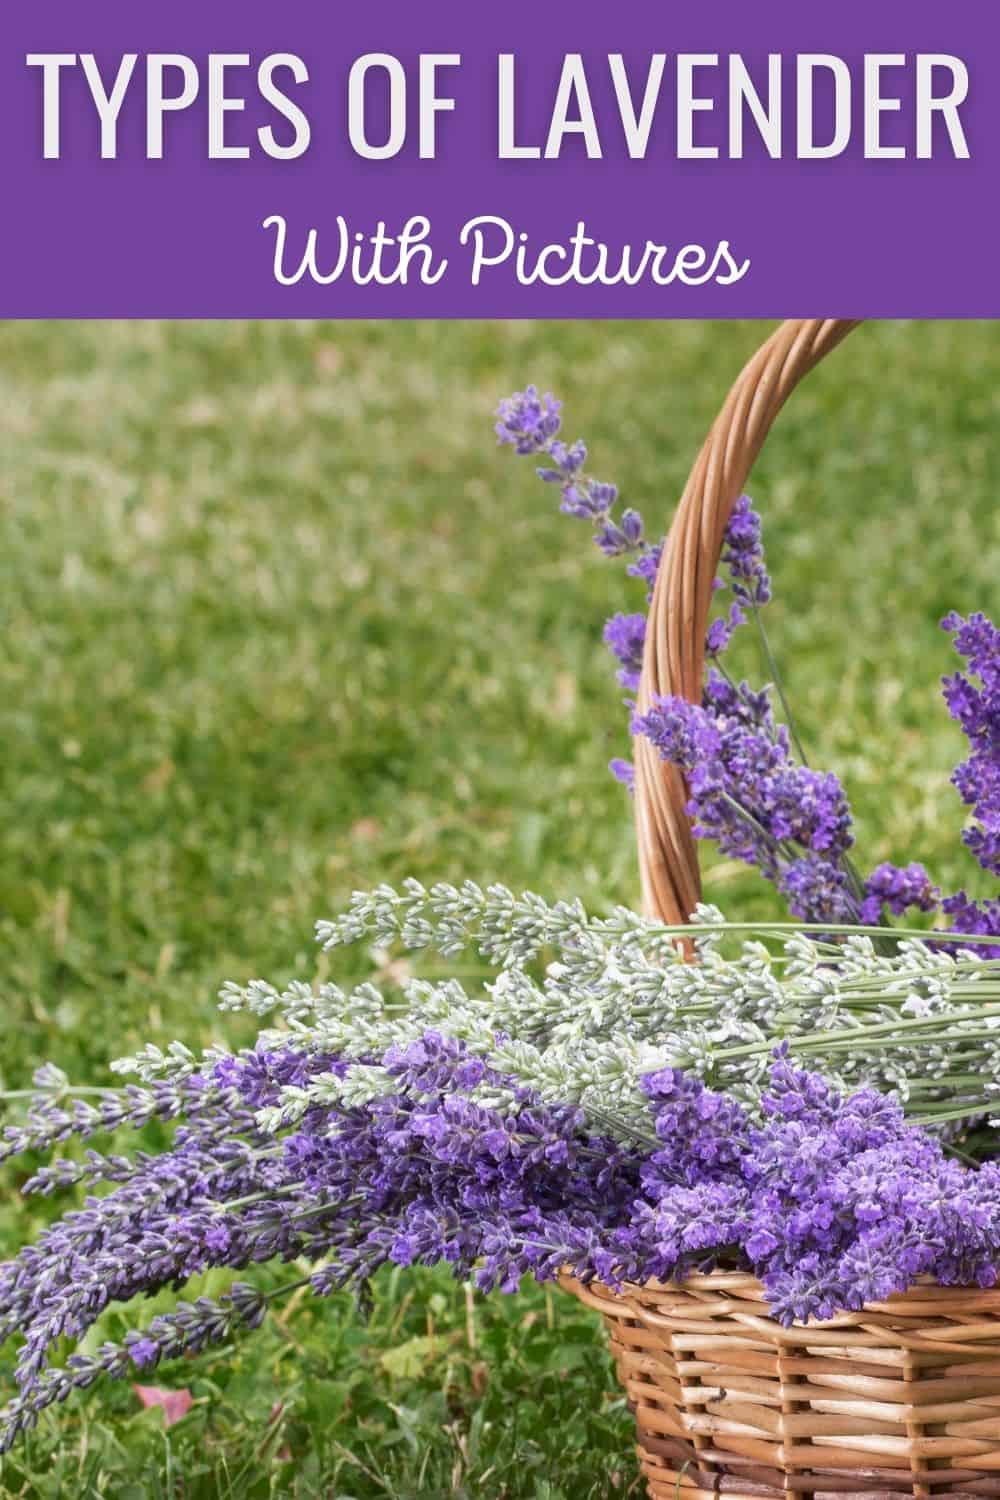 Types of lavender - with pictures